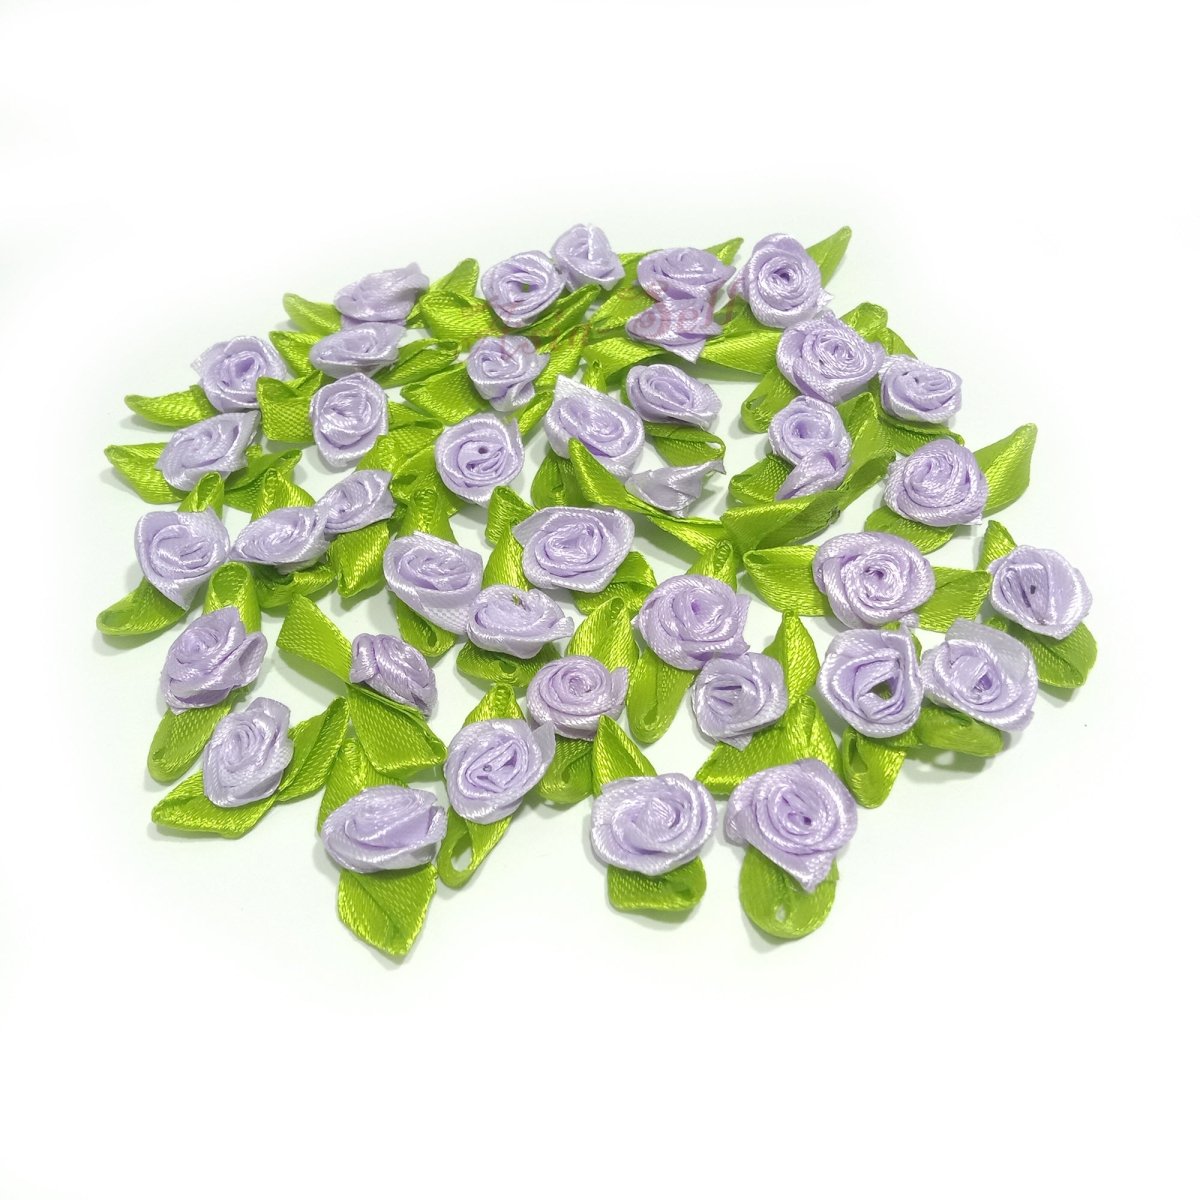 40pcs Mini Artificial Flowers Heads Small Ribbon Roses DIY Crafts Wedding Decorations - Lilac Purple - - Asia Sell